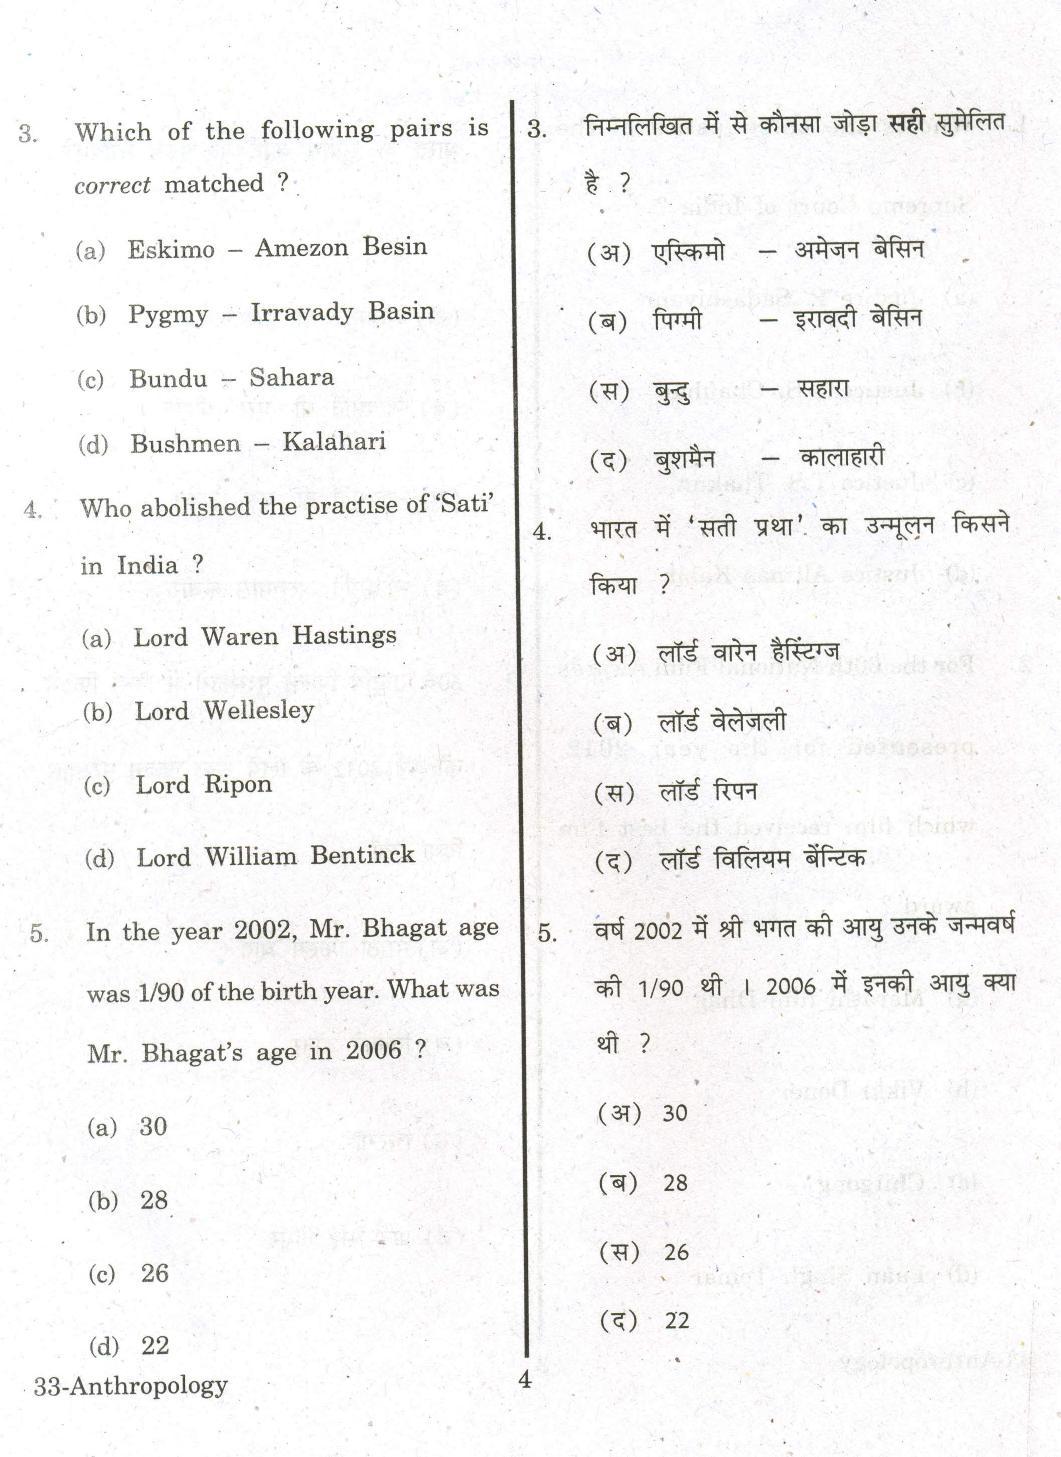 URATPG Anthropology 2013 Question Paper - Page 4